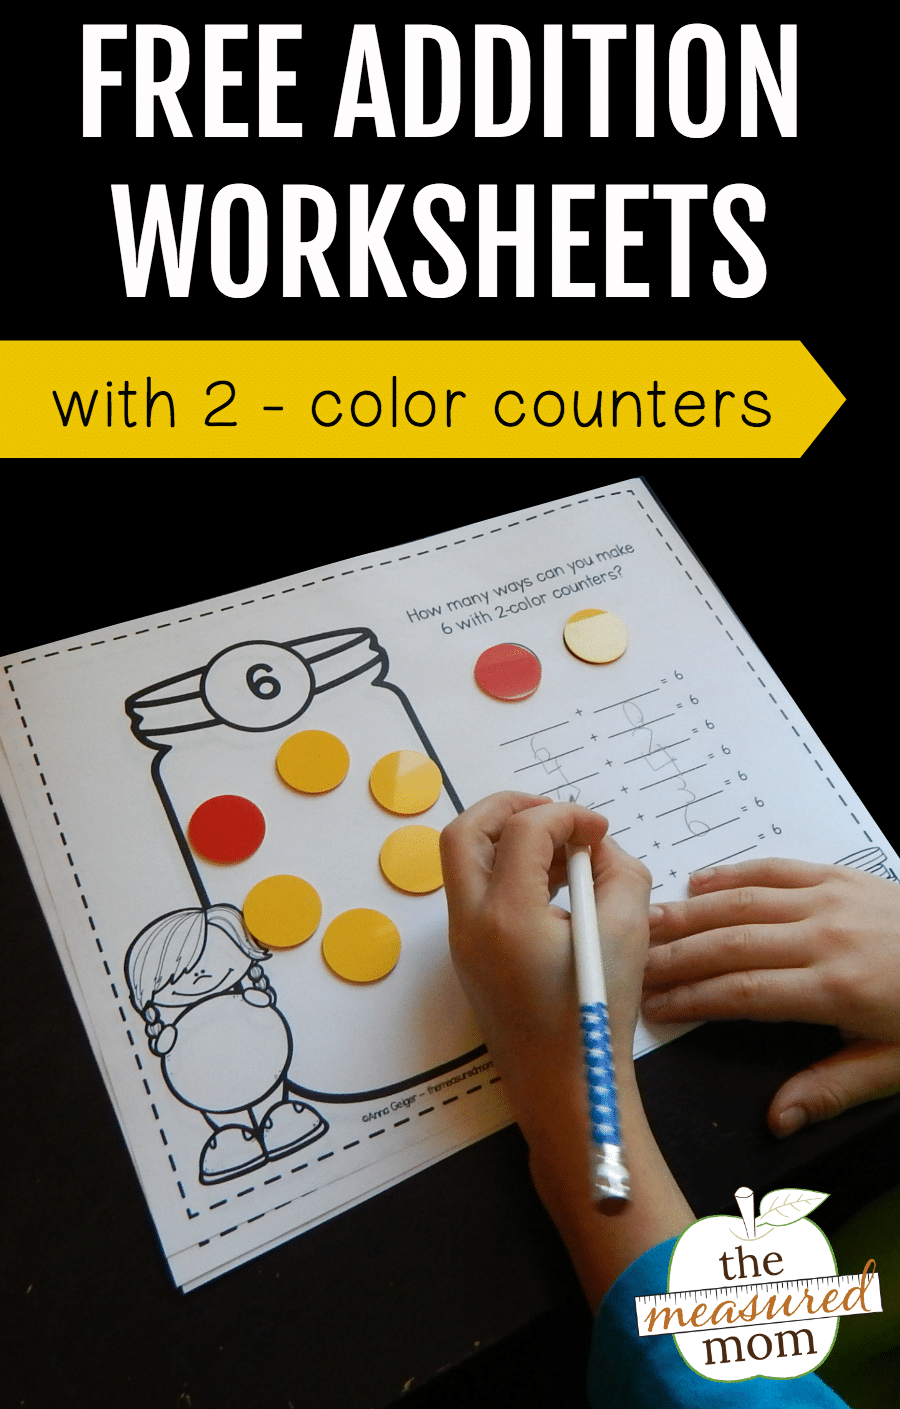 free-addition-worksheets-with-2-color-counters-the-measured-mom